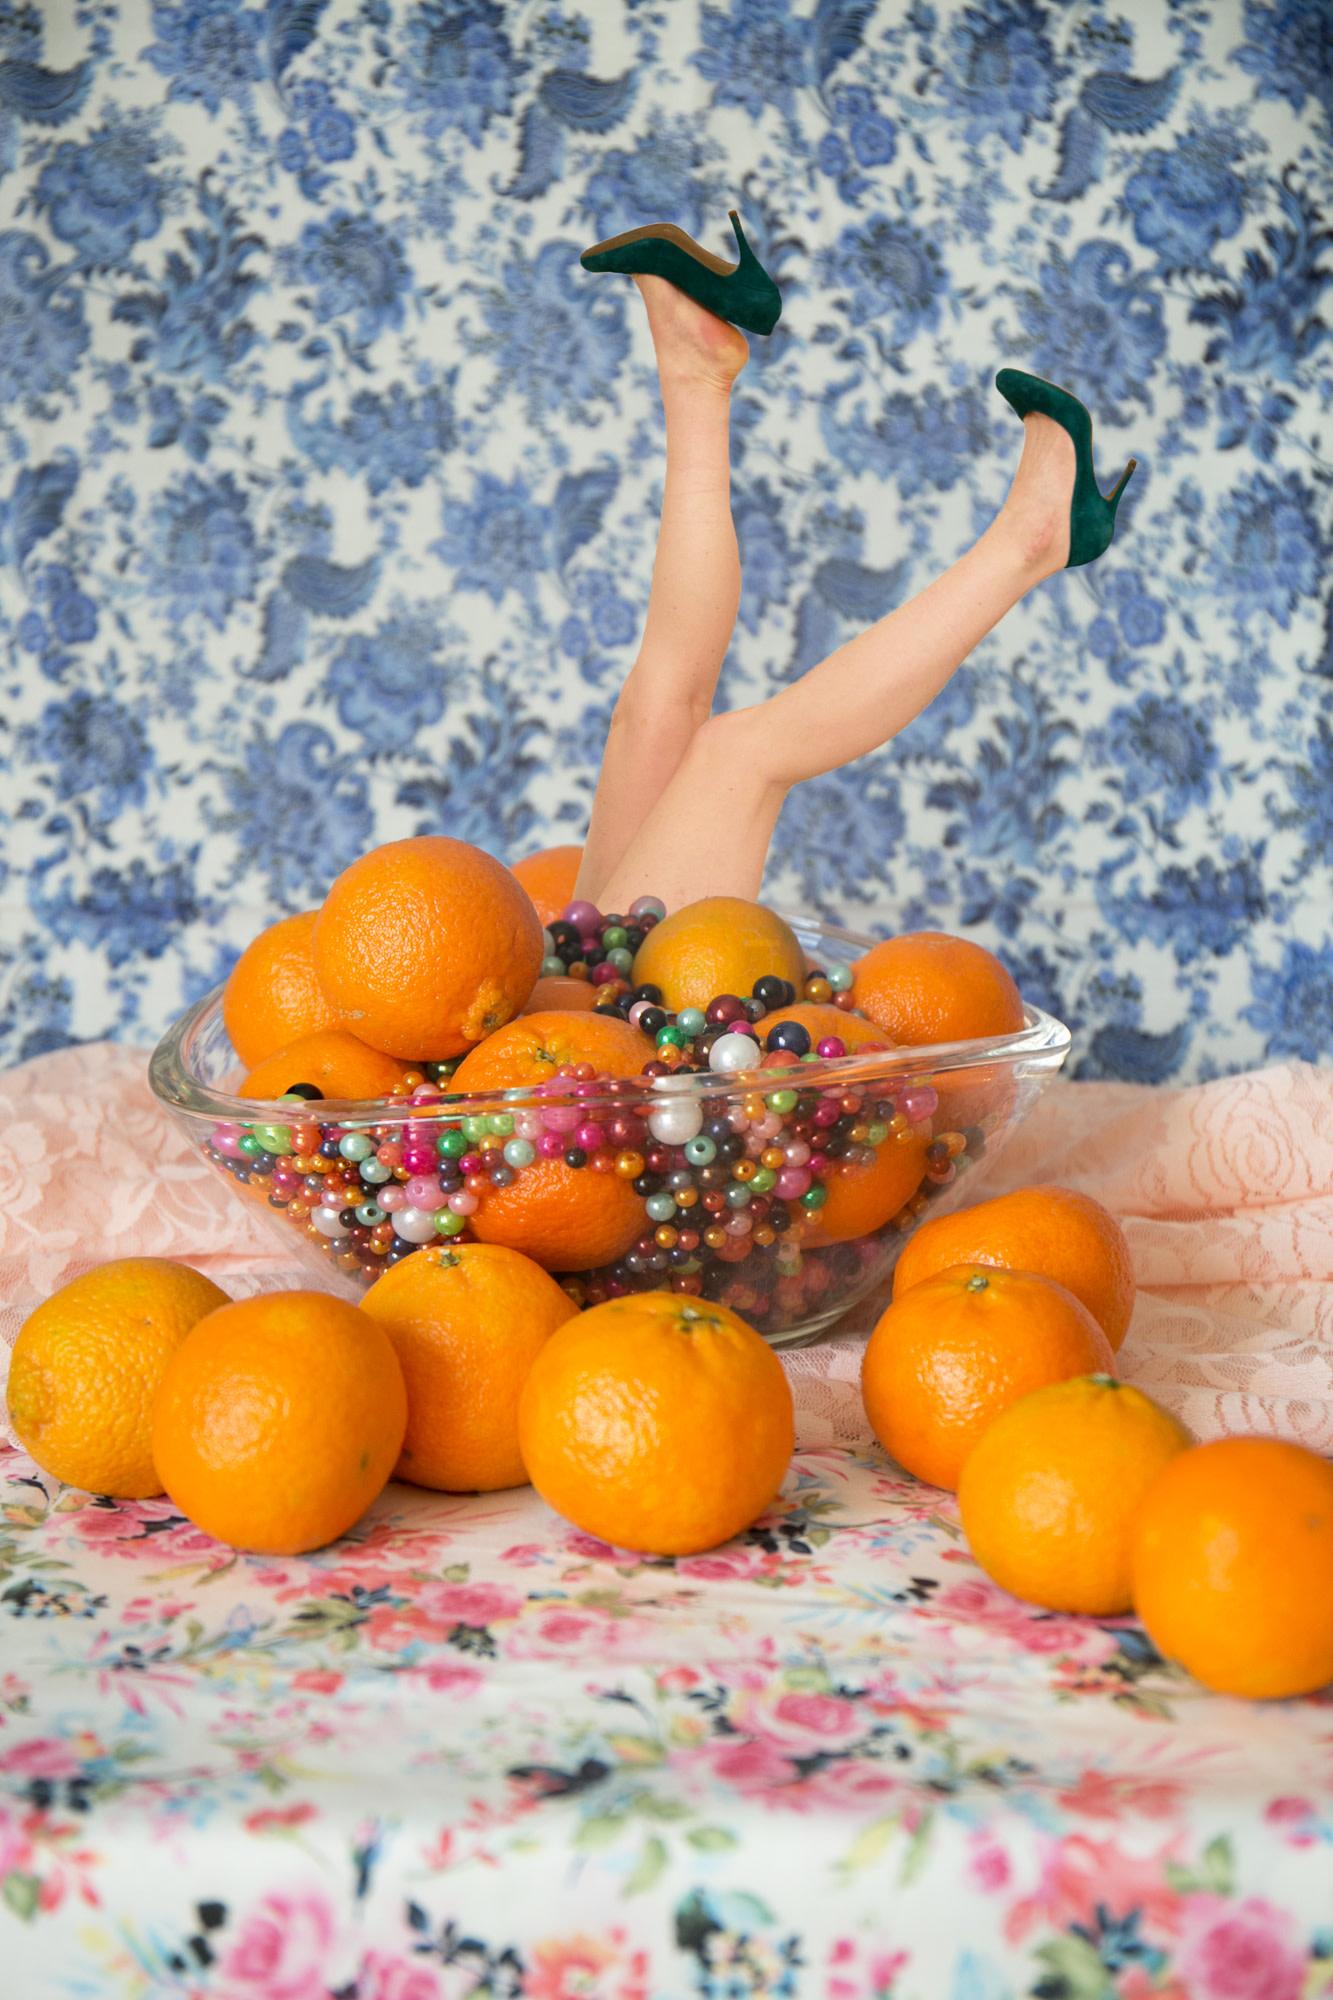 Julia McLaurin Color Photograph - Marge - Still life with oranges, a woman's legs, & floral wallpaper